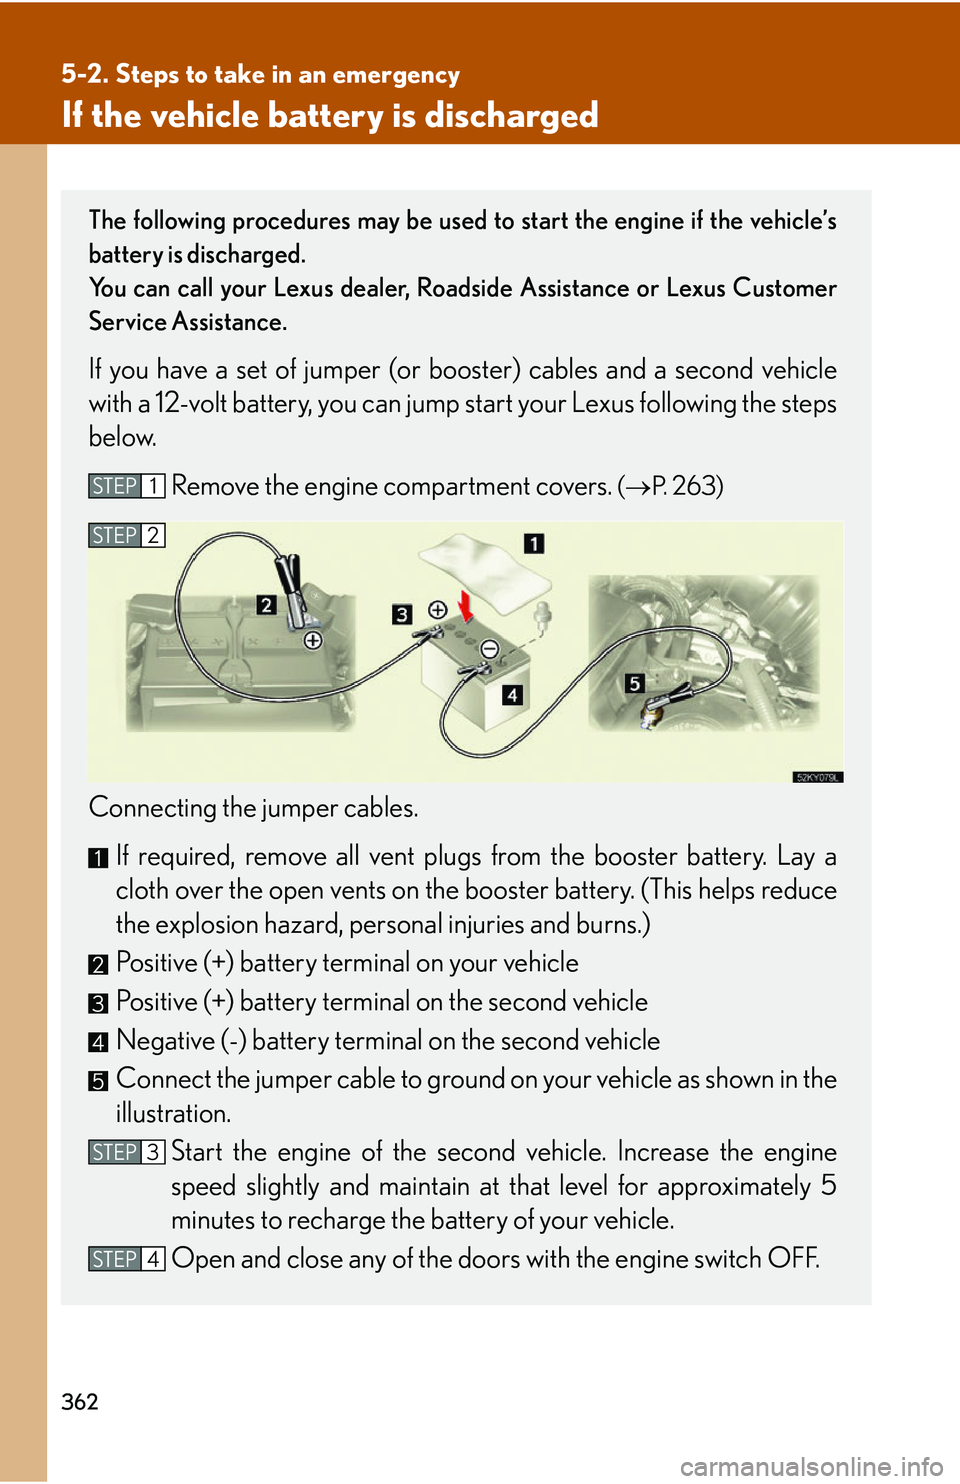 Lexus IS250 2006  Lexus Parking Assist-sensor / LEXUS 2006 IS350/250 THROUGH APRIL 2006 PROD. OWNERS MANUAL (OM53508U) 362
5-2. Steps to take in an emergency
If the vehicle battery is discharged
The following procedures may be used to start the engine if the vehicle’s
battery is discharged.
You can call your Lexus d